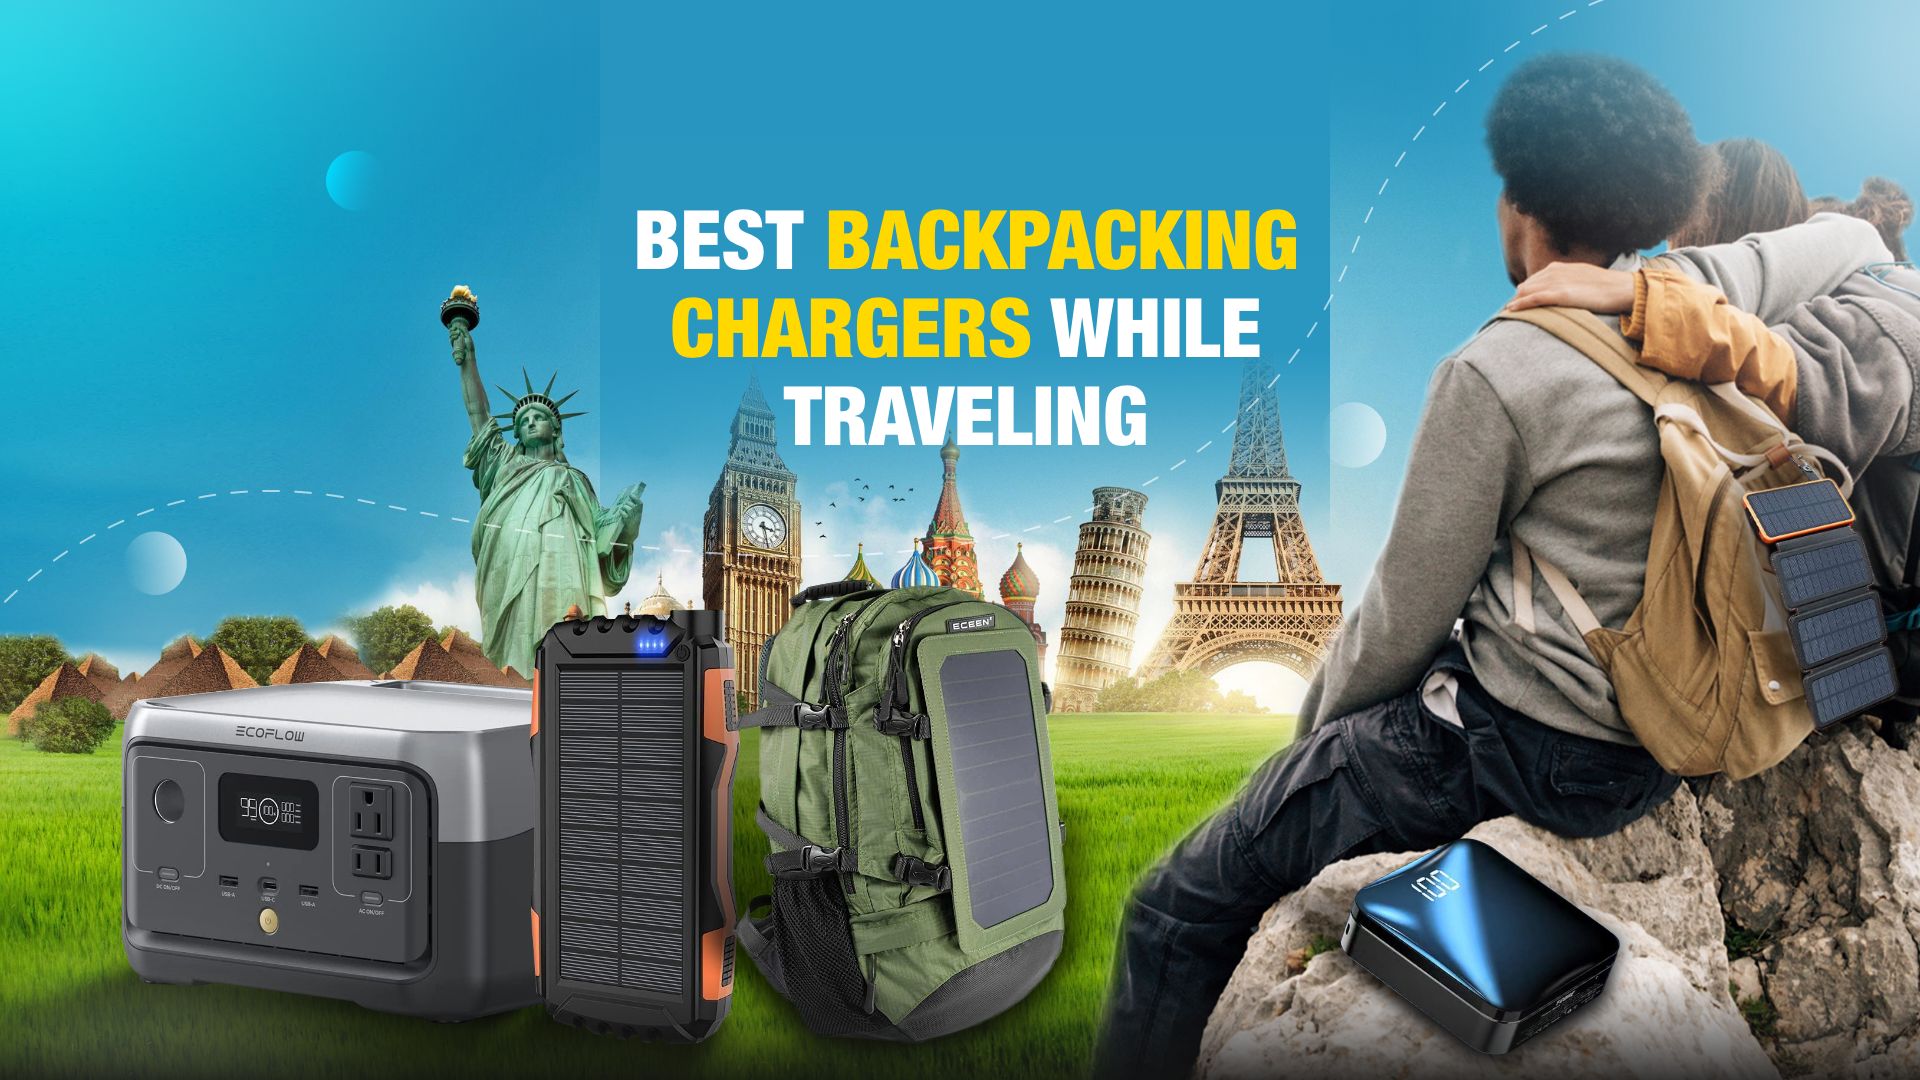 10 Best Backpacking Chargers While Traveling in 2023